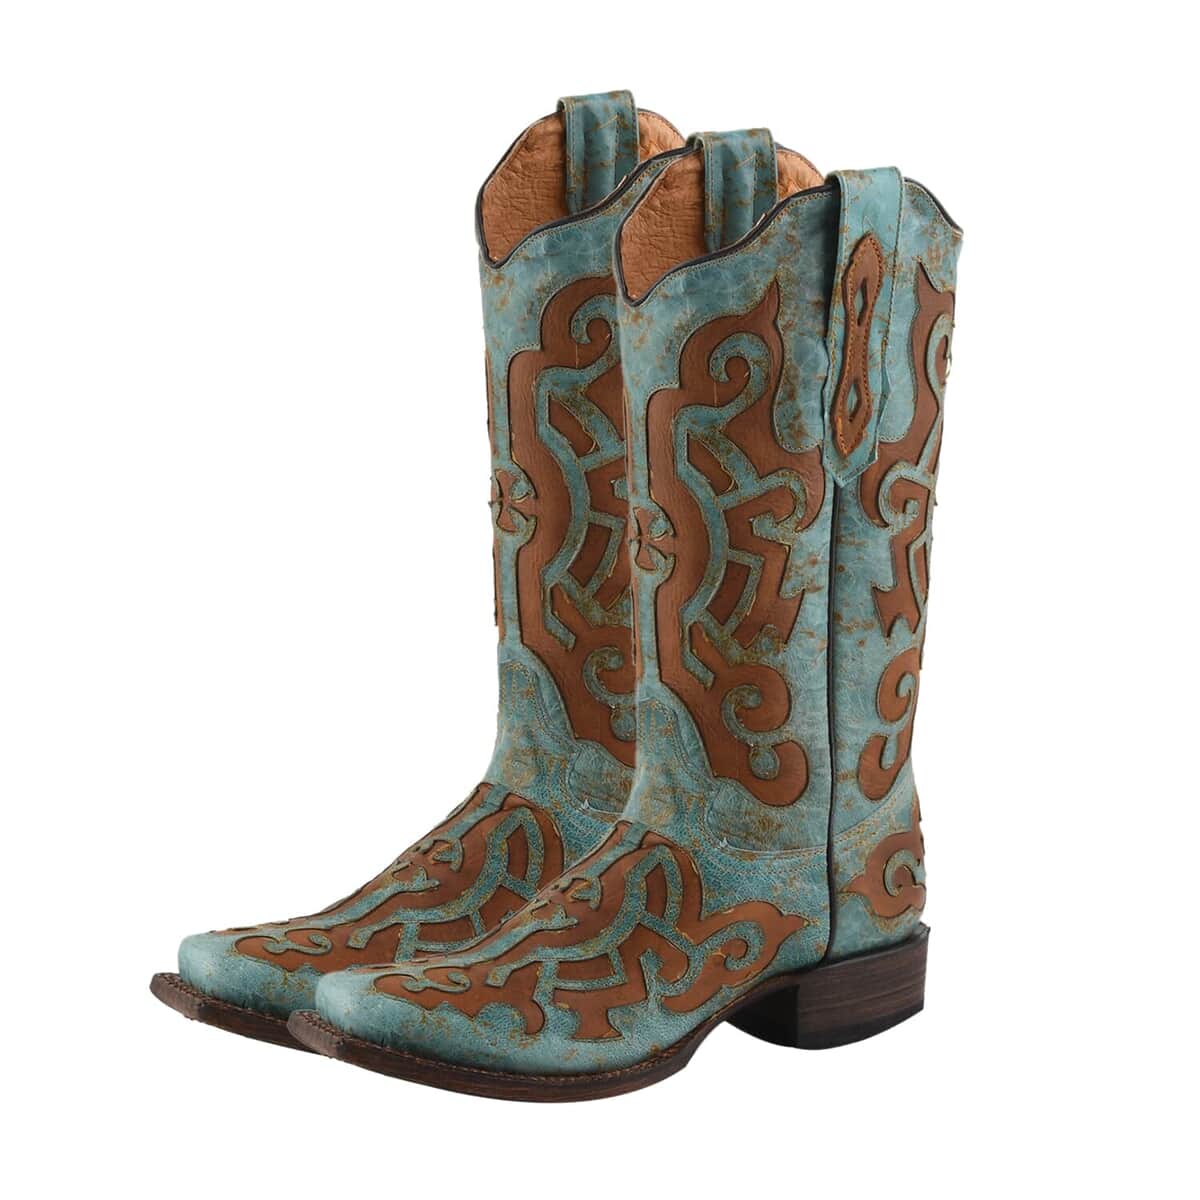 TANNER MARK 100% Genuine Leather Western Style Square Toe Boot with Glitter Lace Design - Turquoise/Cognac - Size 5.5 image number 0